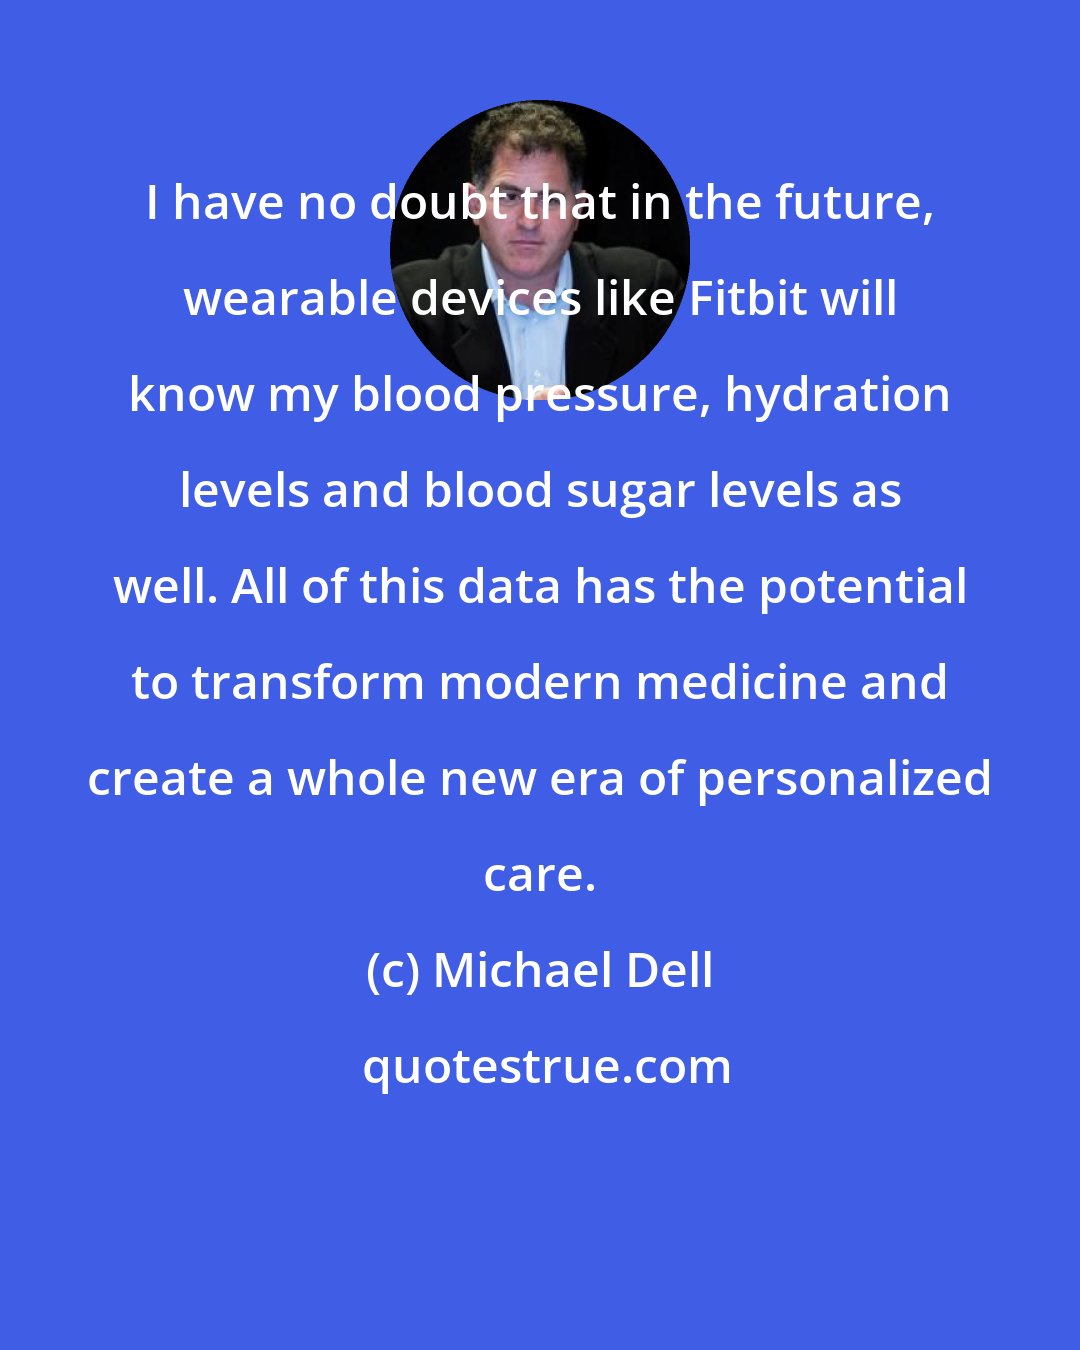 Michael Dell: I have no doubt that in the future, wearable devices like Fitbit will know my blood pressure, hydration levels and blood sugar levels as well. All of this data has the potential to transform modern medicine and create a whole new era of personalized care.